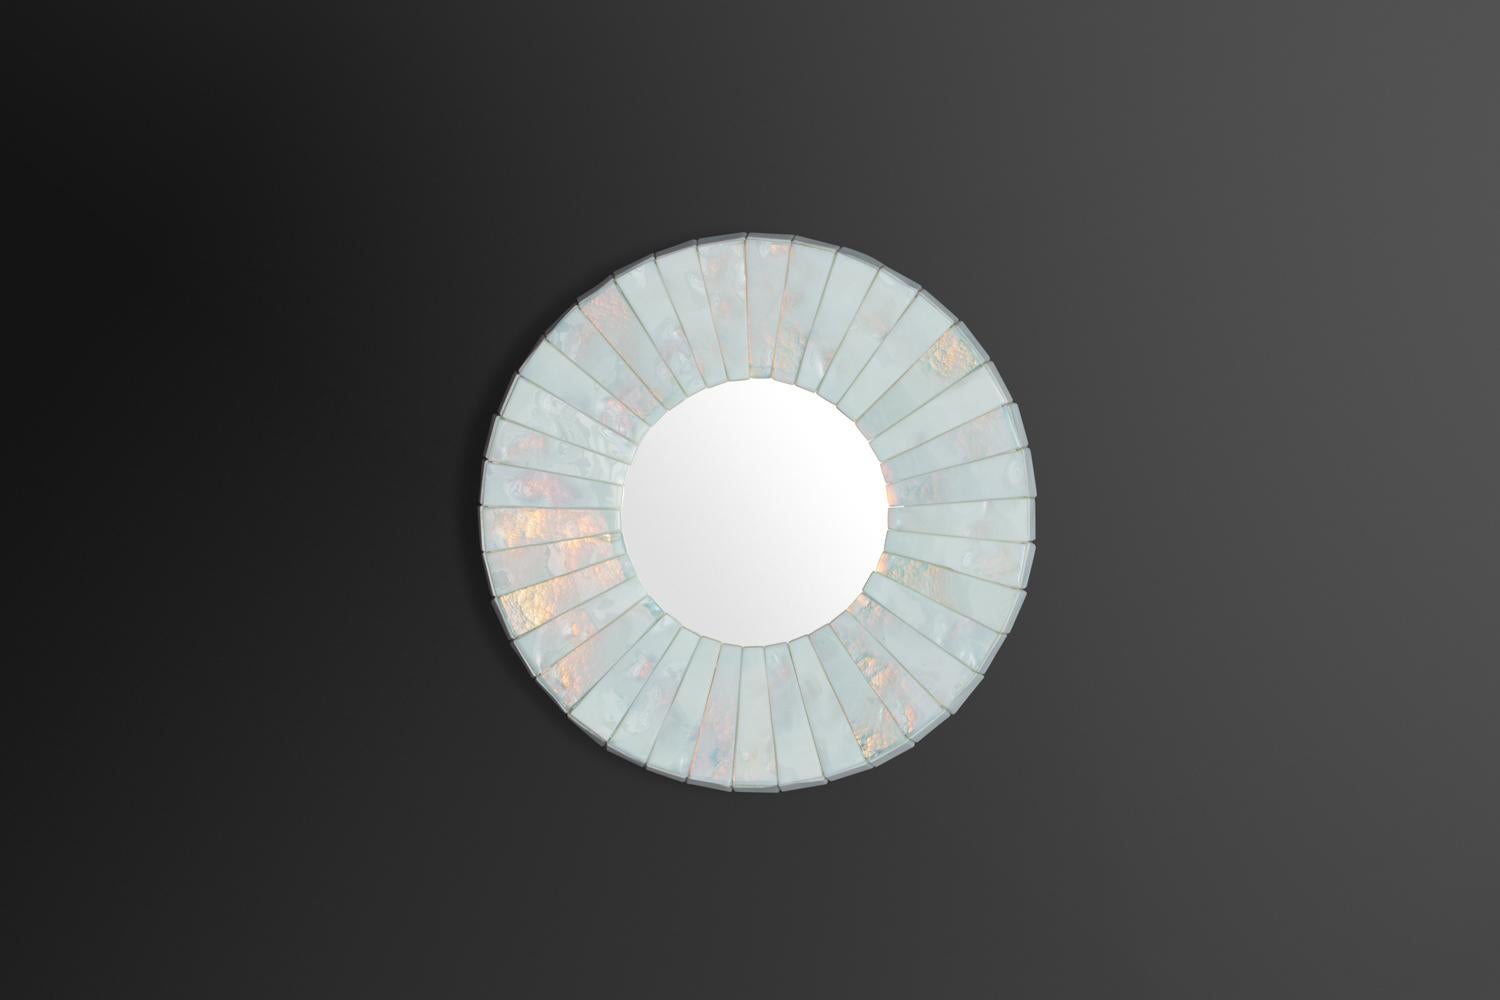 Hand-hewn wedges of thick, pitted milk glass with turquoise-rose iridescent tint, abutting similarly chiseled sides, encompassing a round mirrored glass plate.
Model “Leucos” mirror plate diameter 17.5.